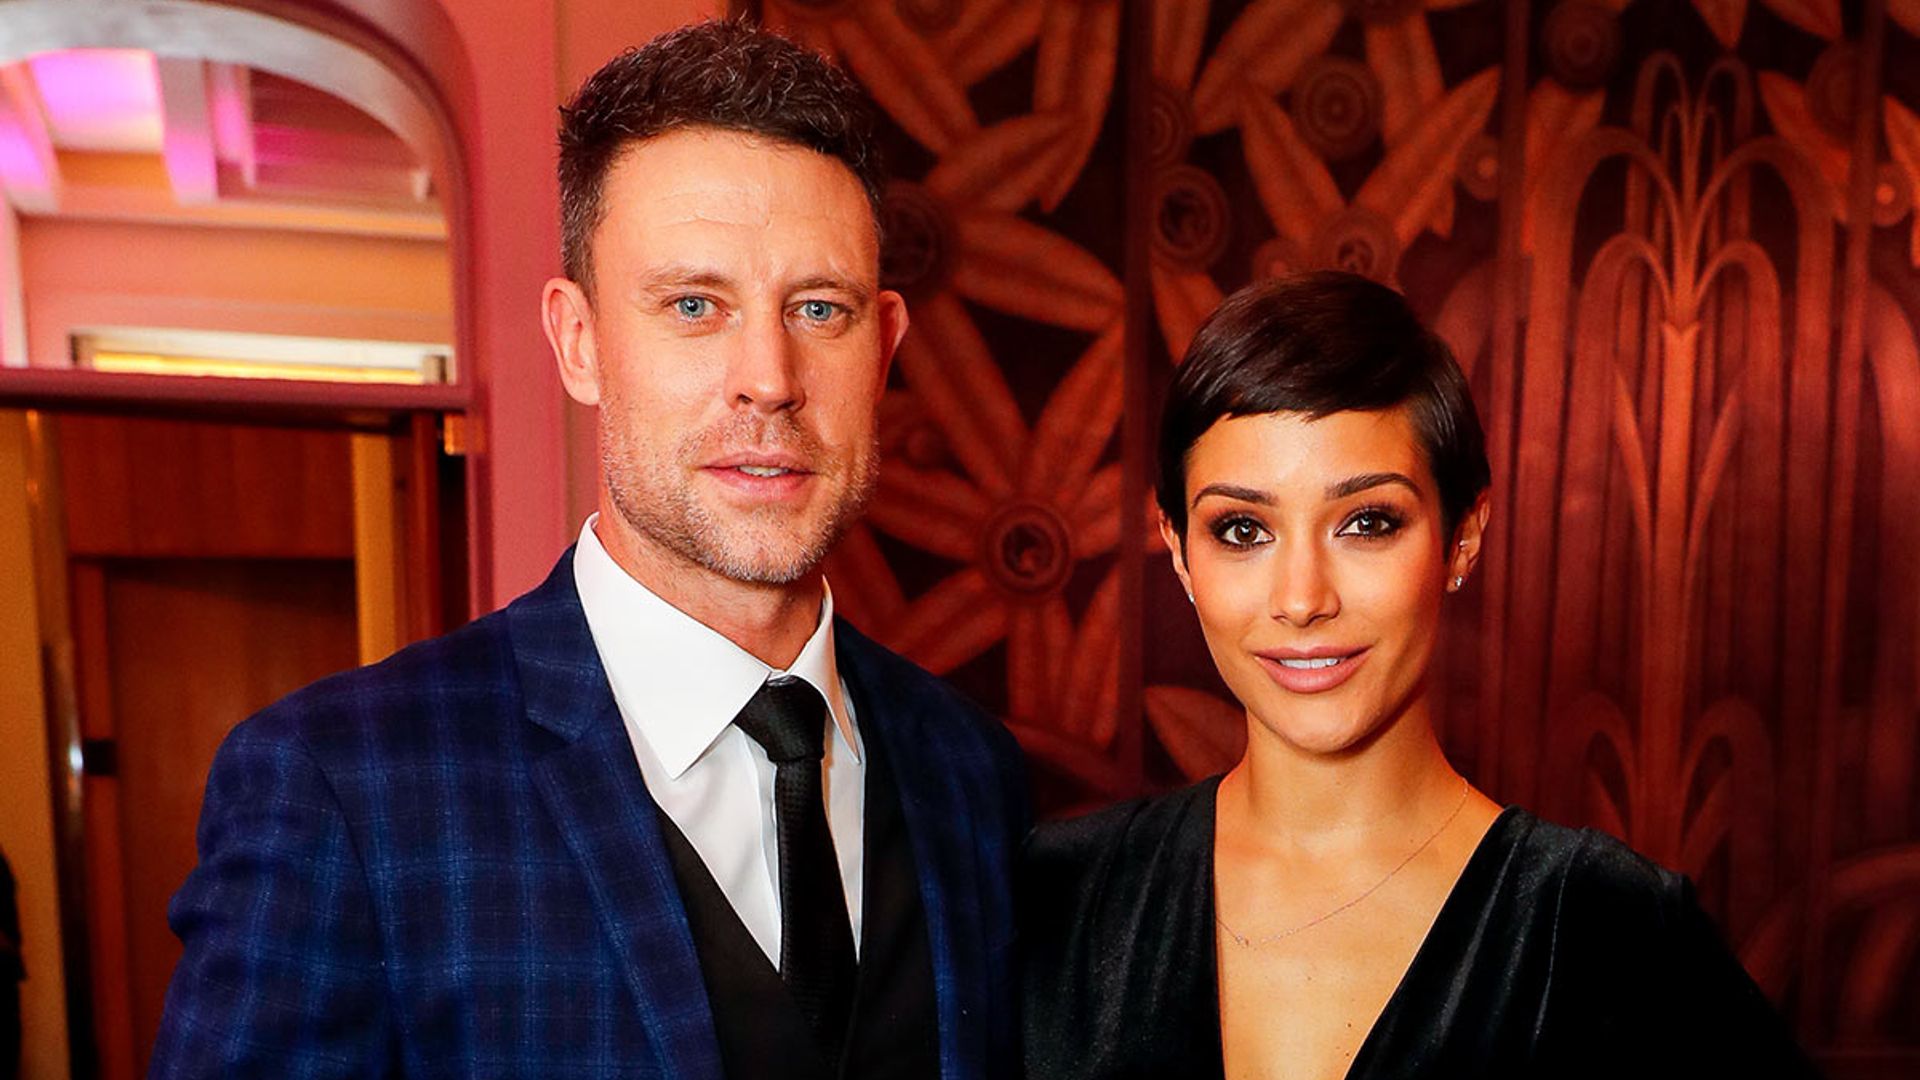 Frankie Bridge and husband Wayne's sons' bedroom transformation will divide opinion